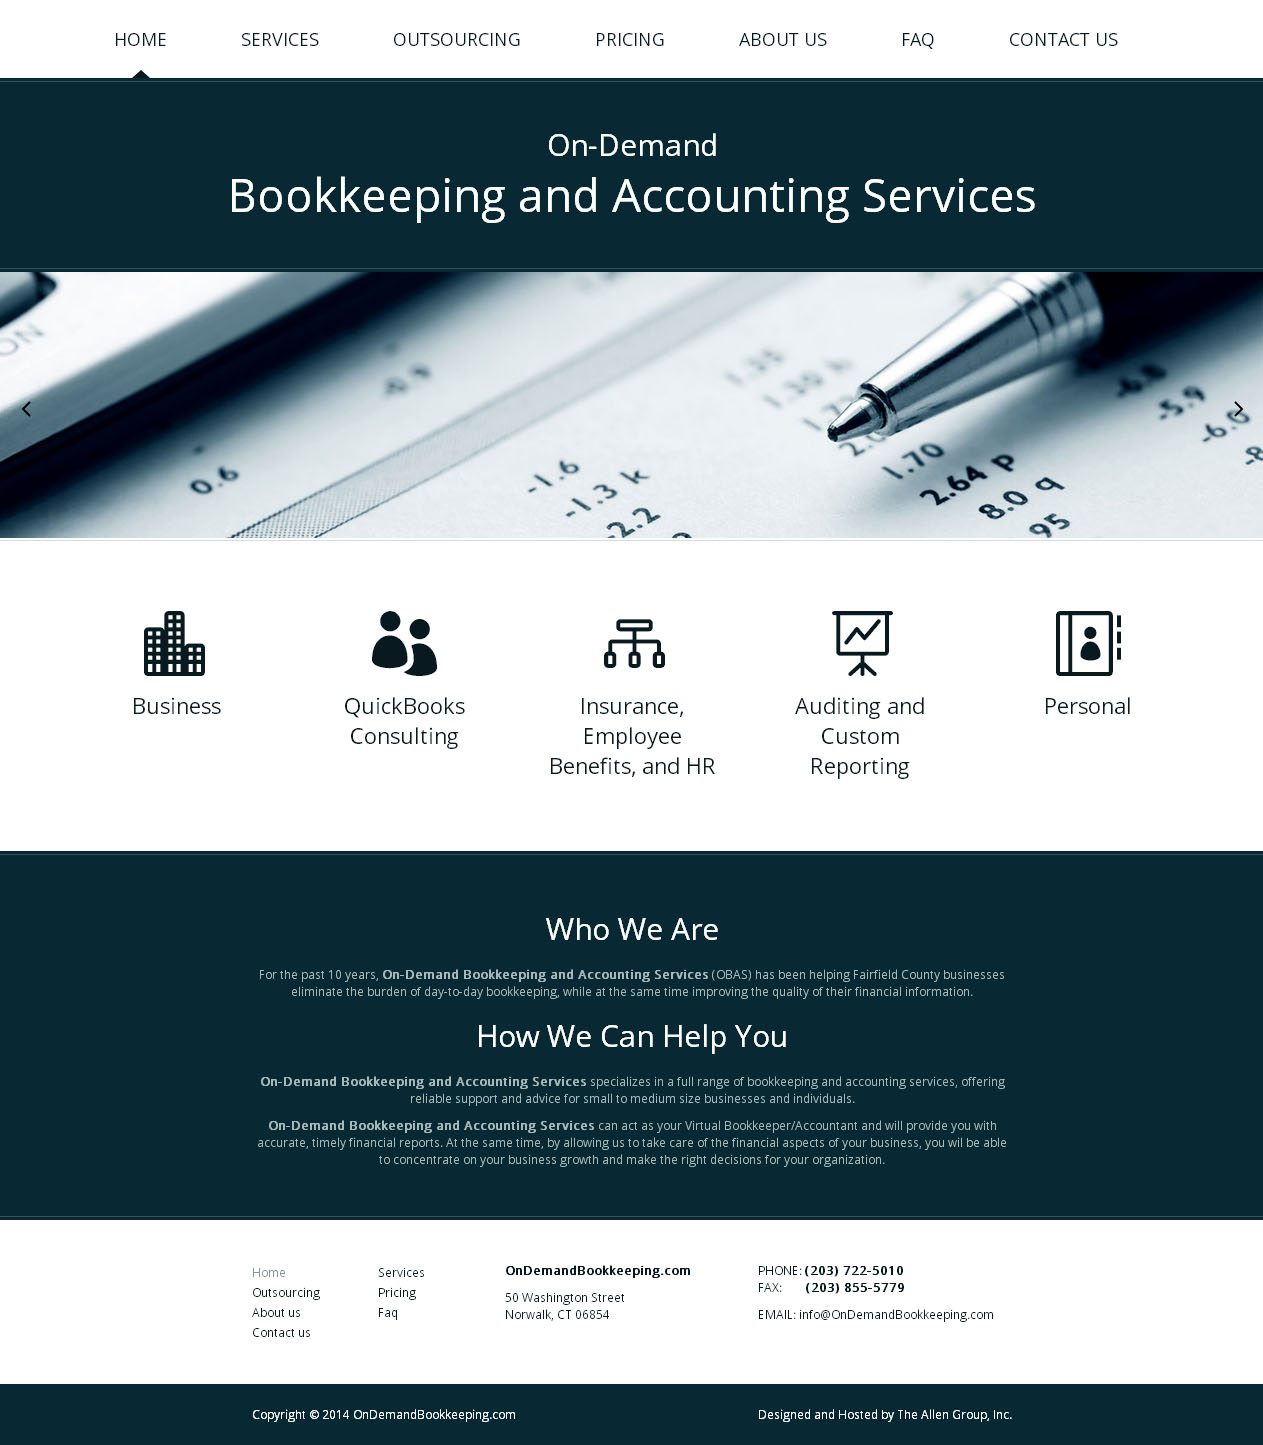 On-Demand Bookkeeping and Accounting Services